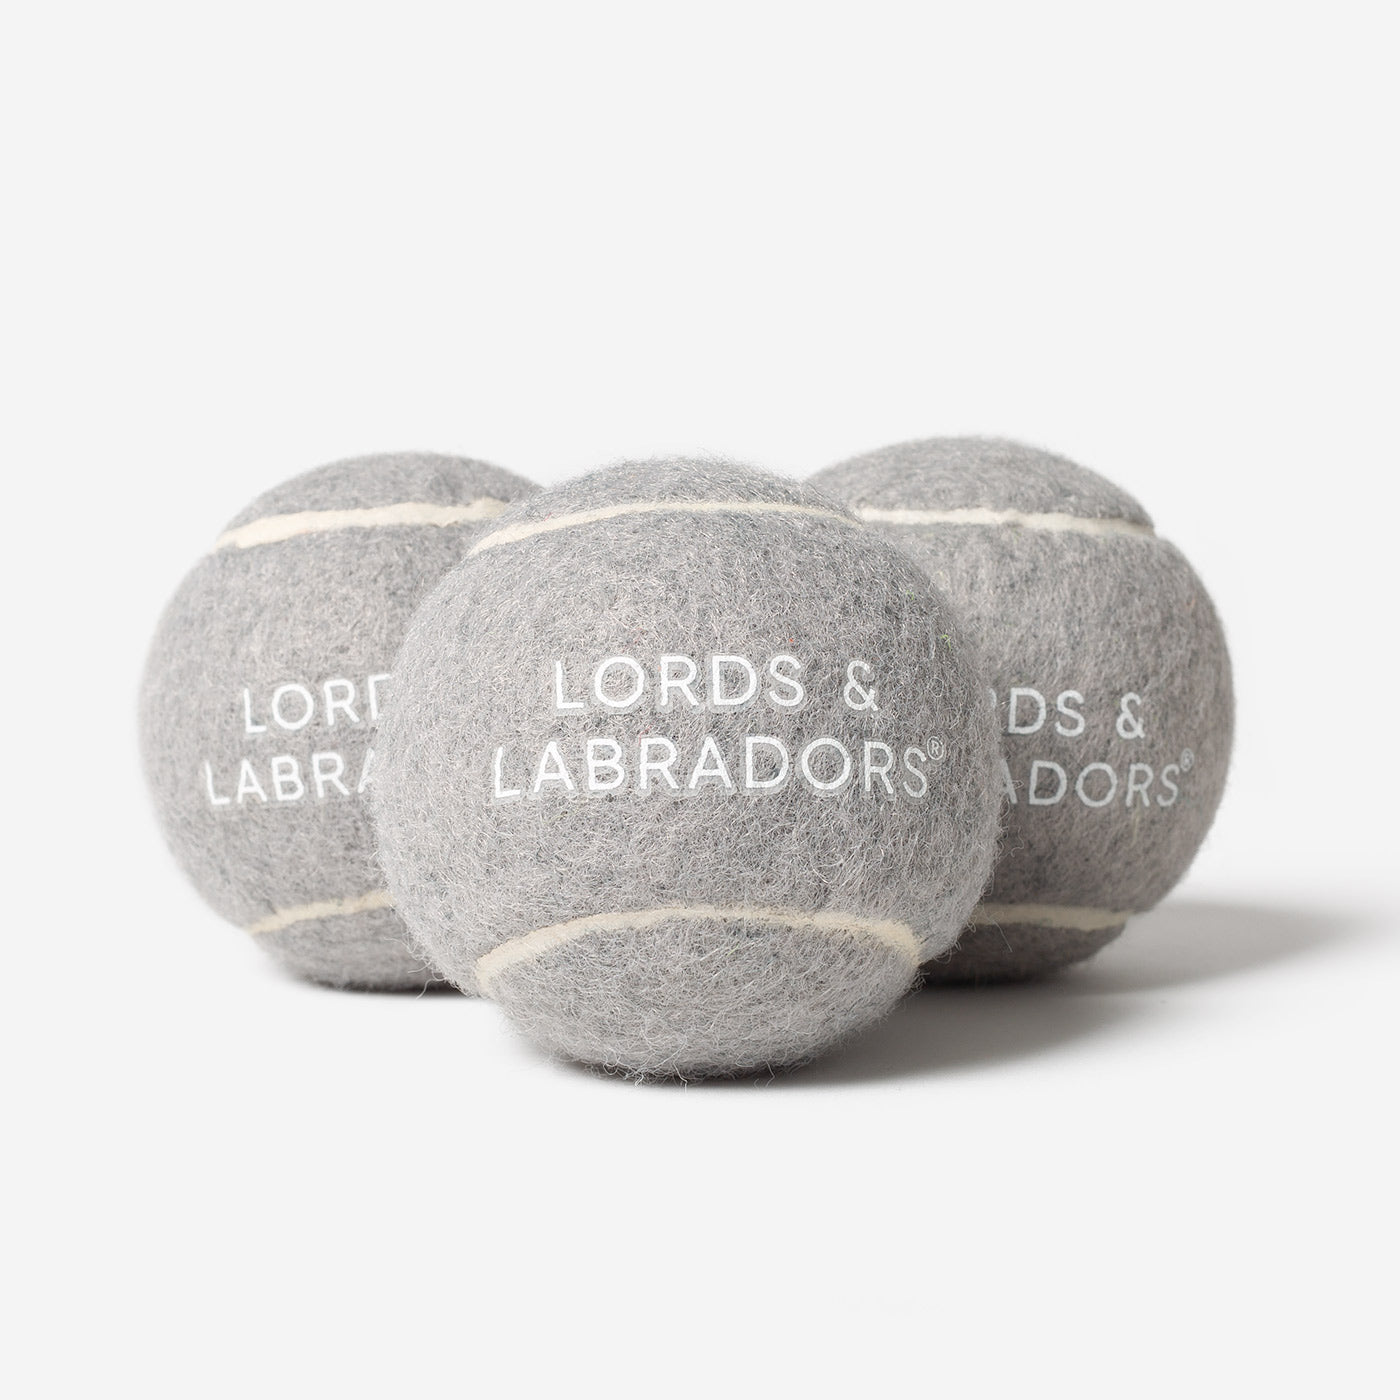 Super-Bouncy Tennis Balls For Dogs, 3 Pack of Tennis Dog Balls, Perfect For Outdoor Play! Available Now at Lords & Labradors US